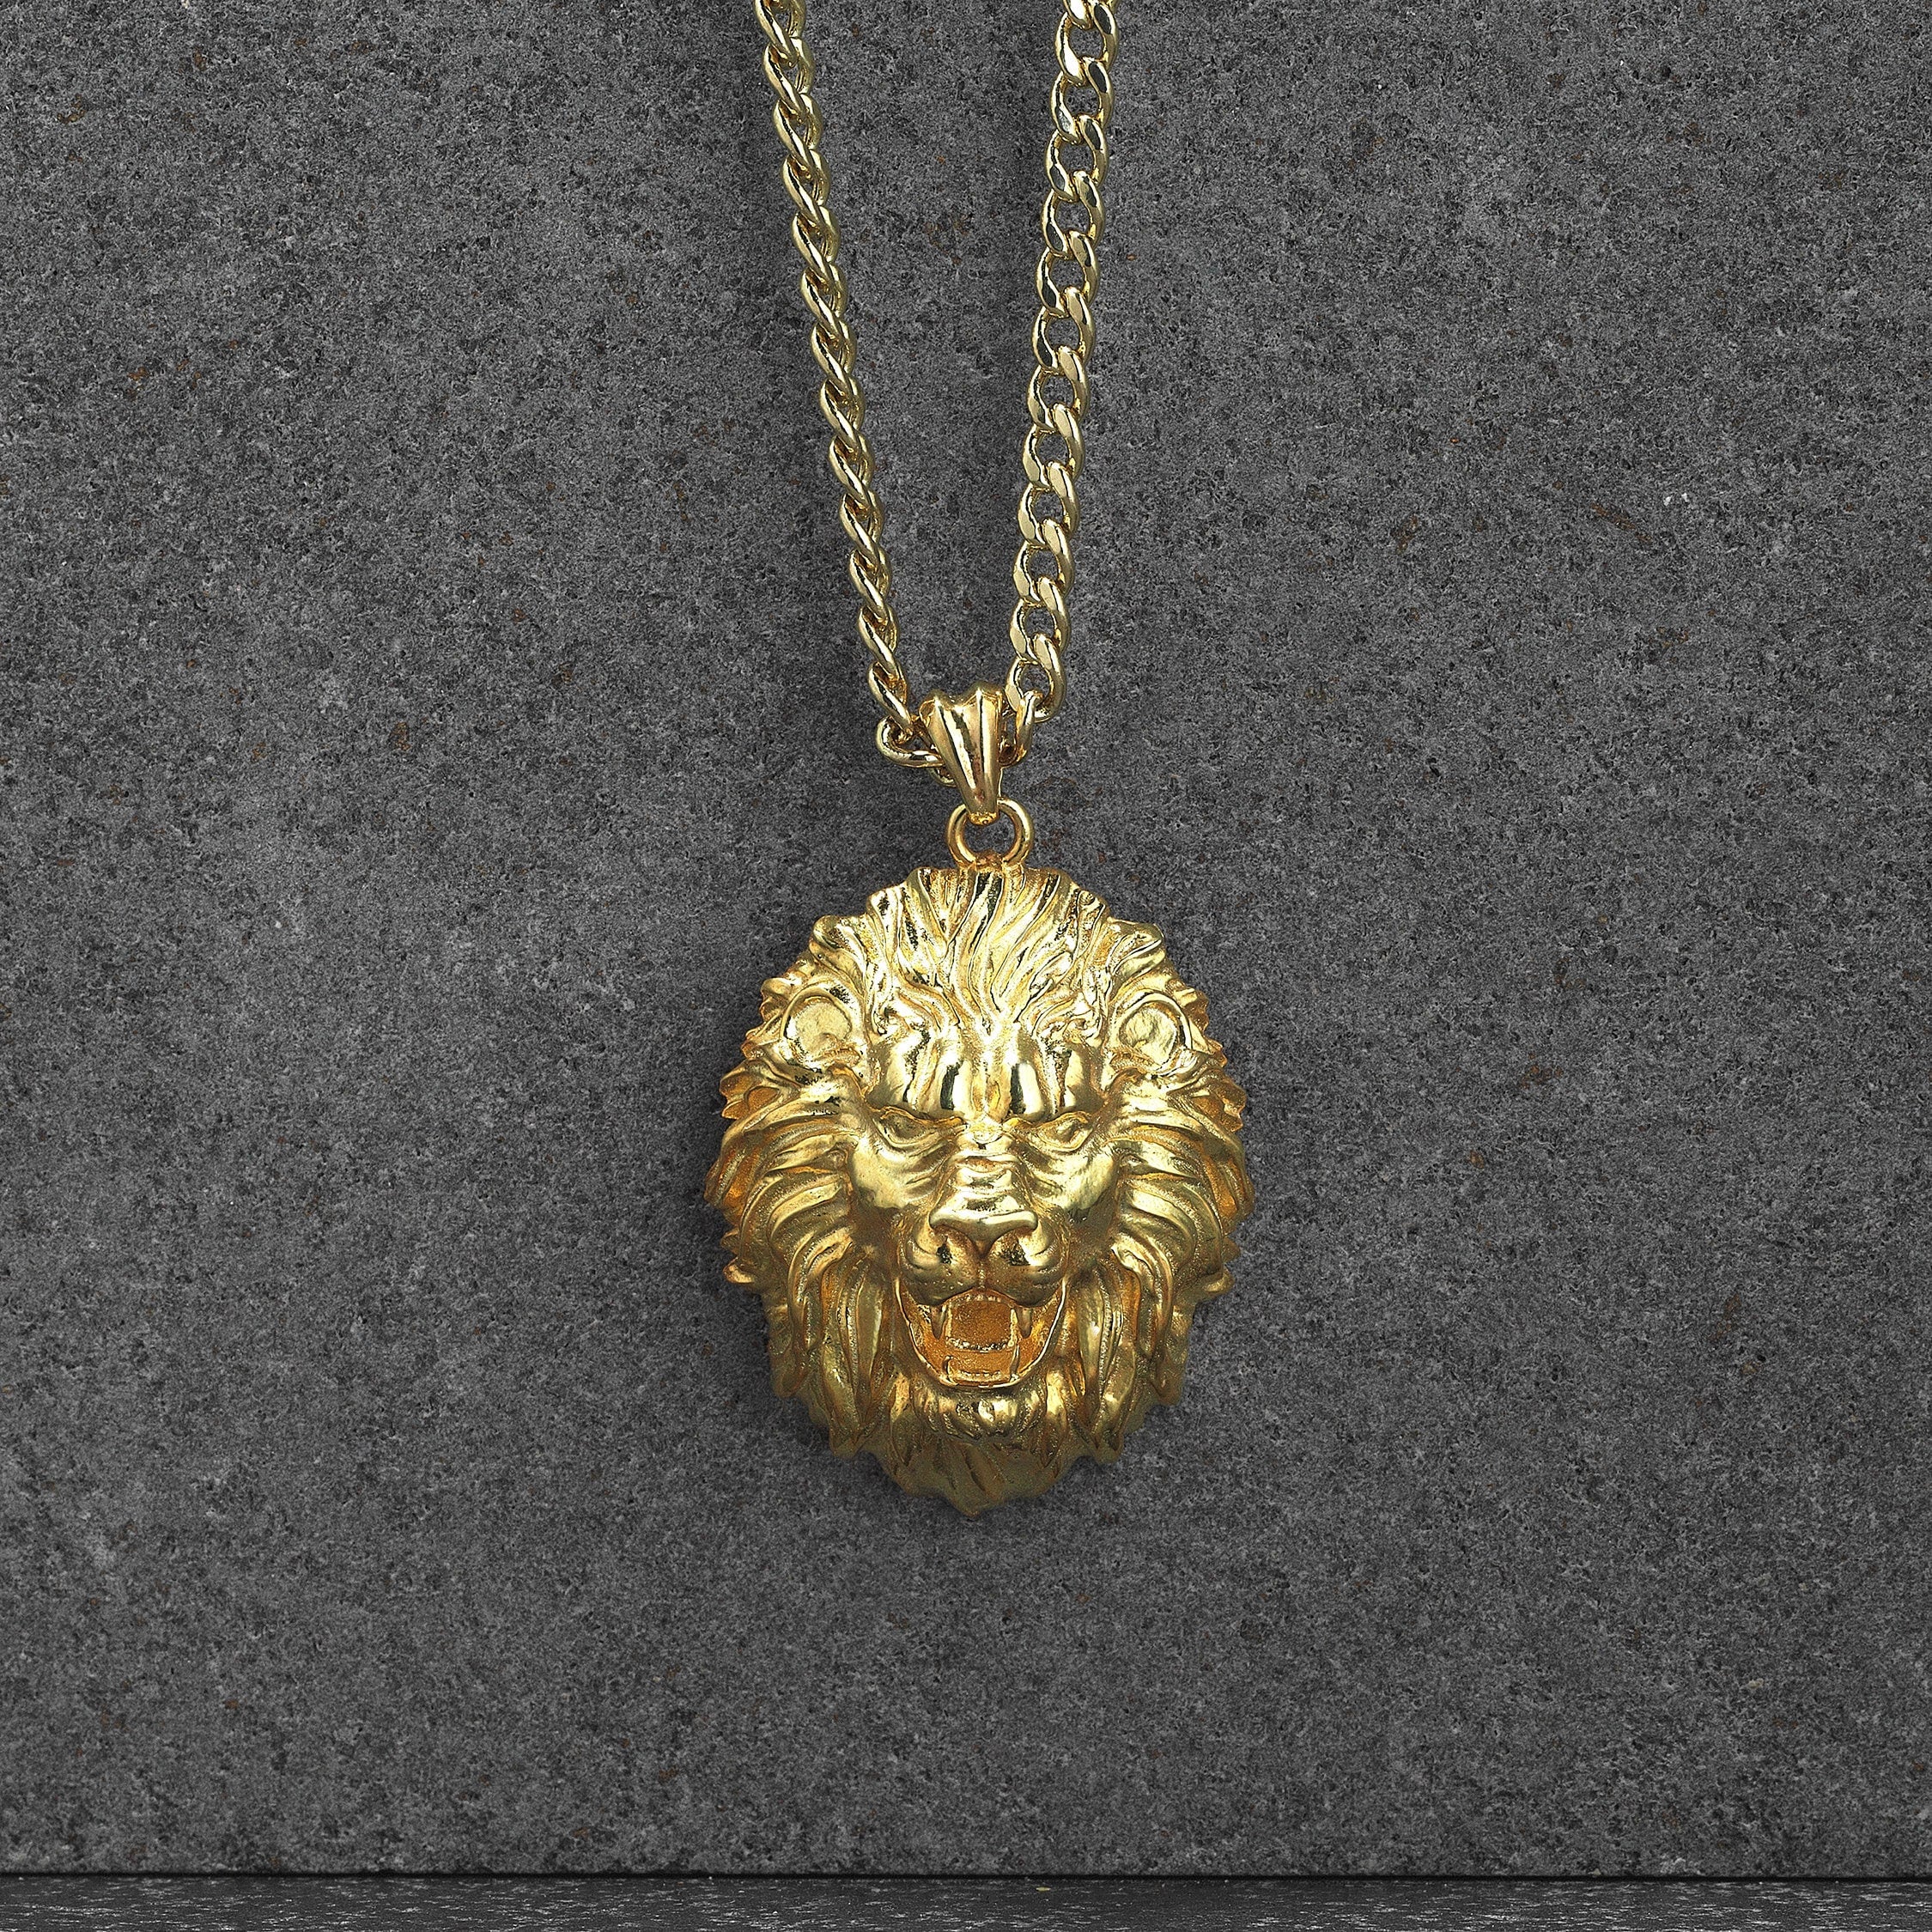 925 Sterling Silver Mens Lion Necklace with Mini Black Stone and Chain  Type2 » Anitolia